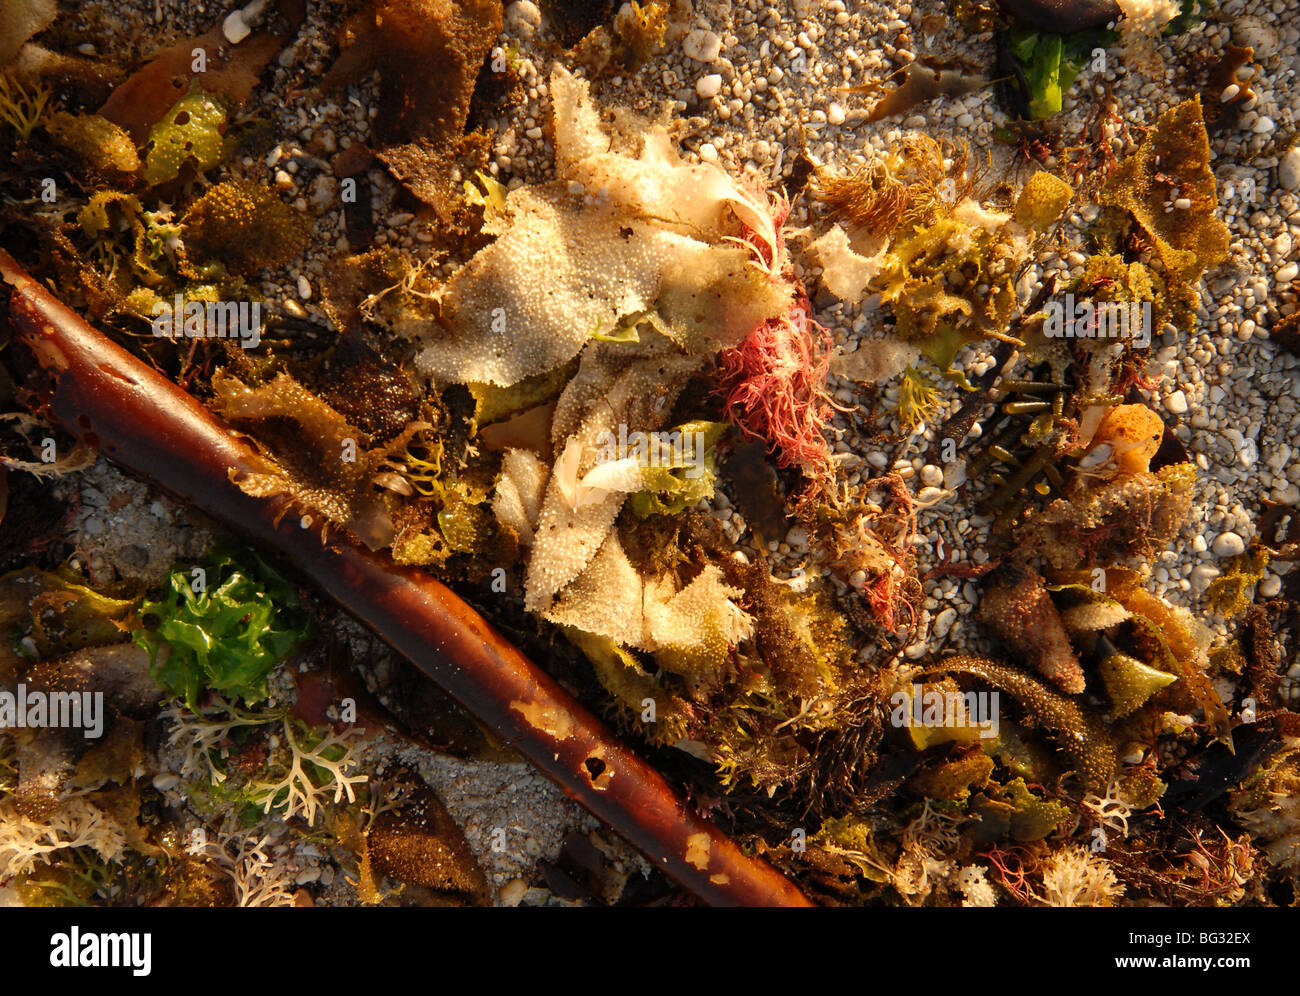 sea weed and debris left on the beach after a storm Stock Photo